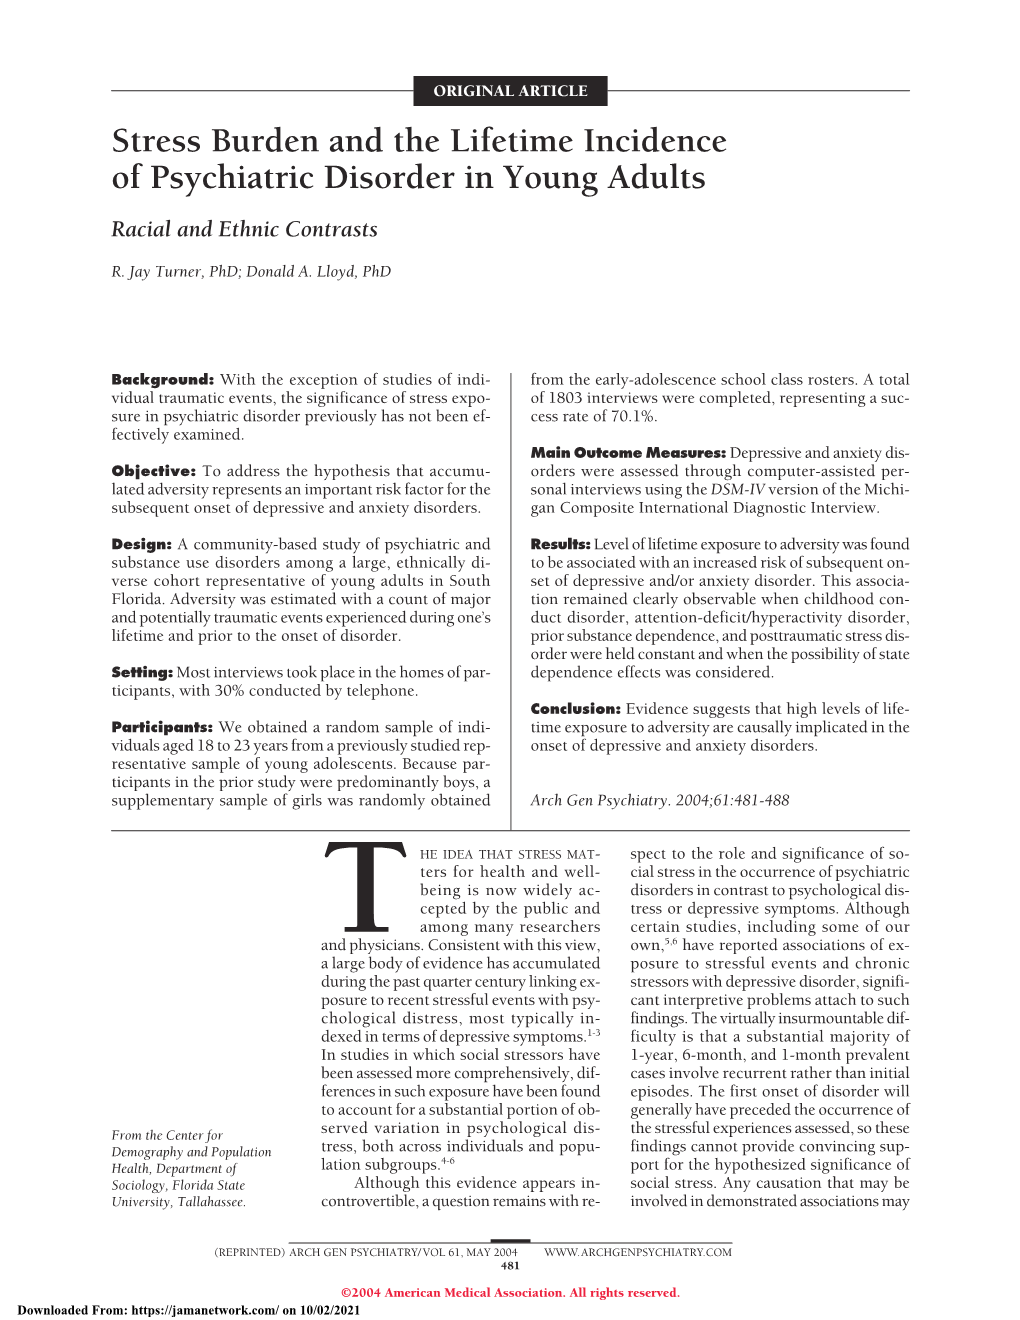 Stress Burden and the Lifetime Incidence of Psychiatric Disorder in Young Adults Racial and Ethnic Contrasts